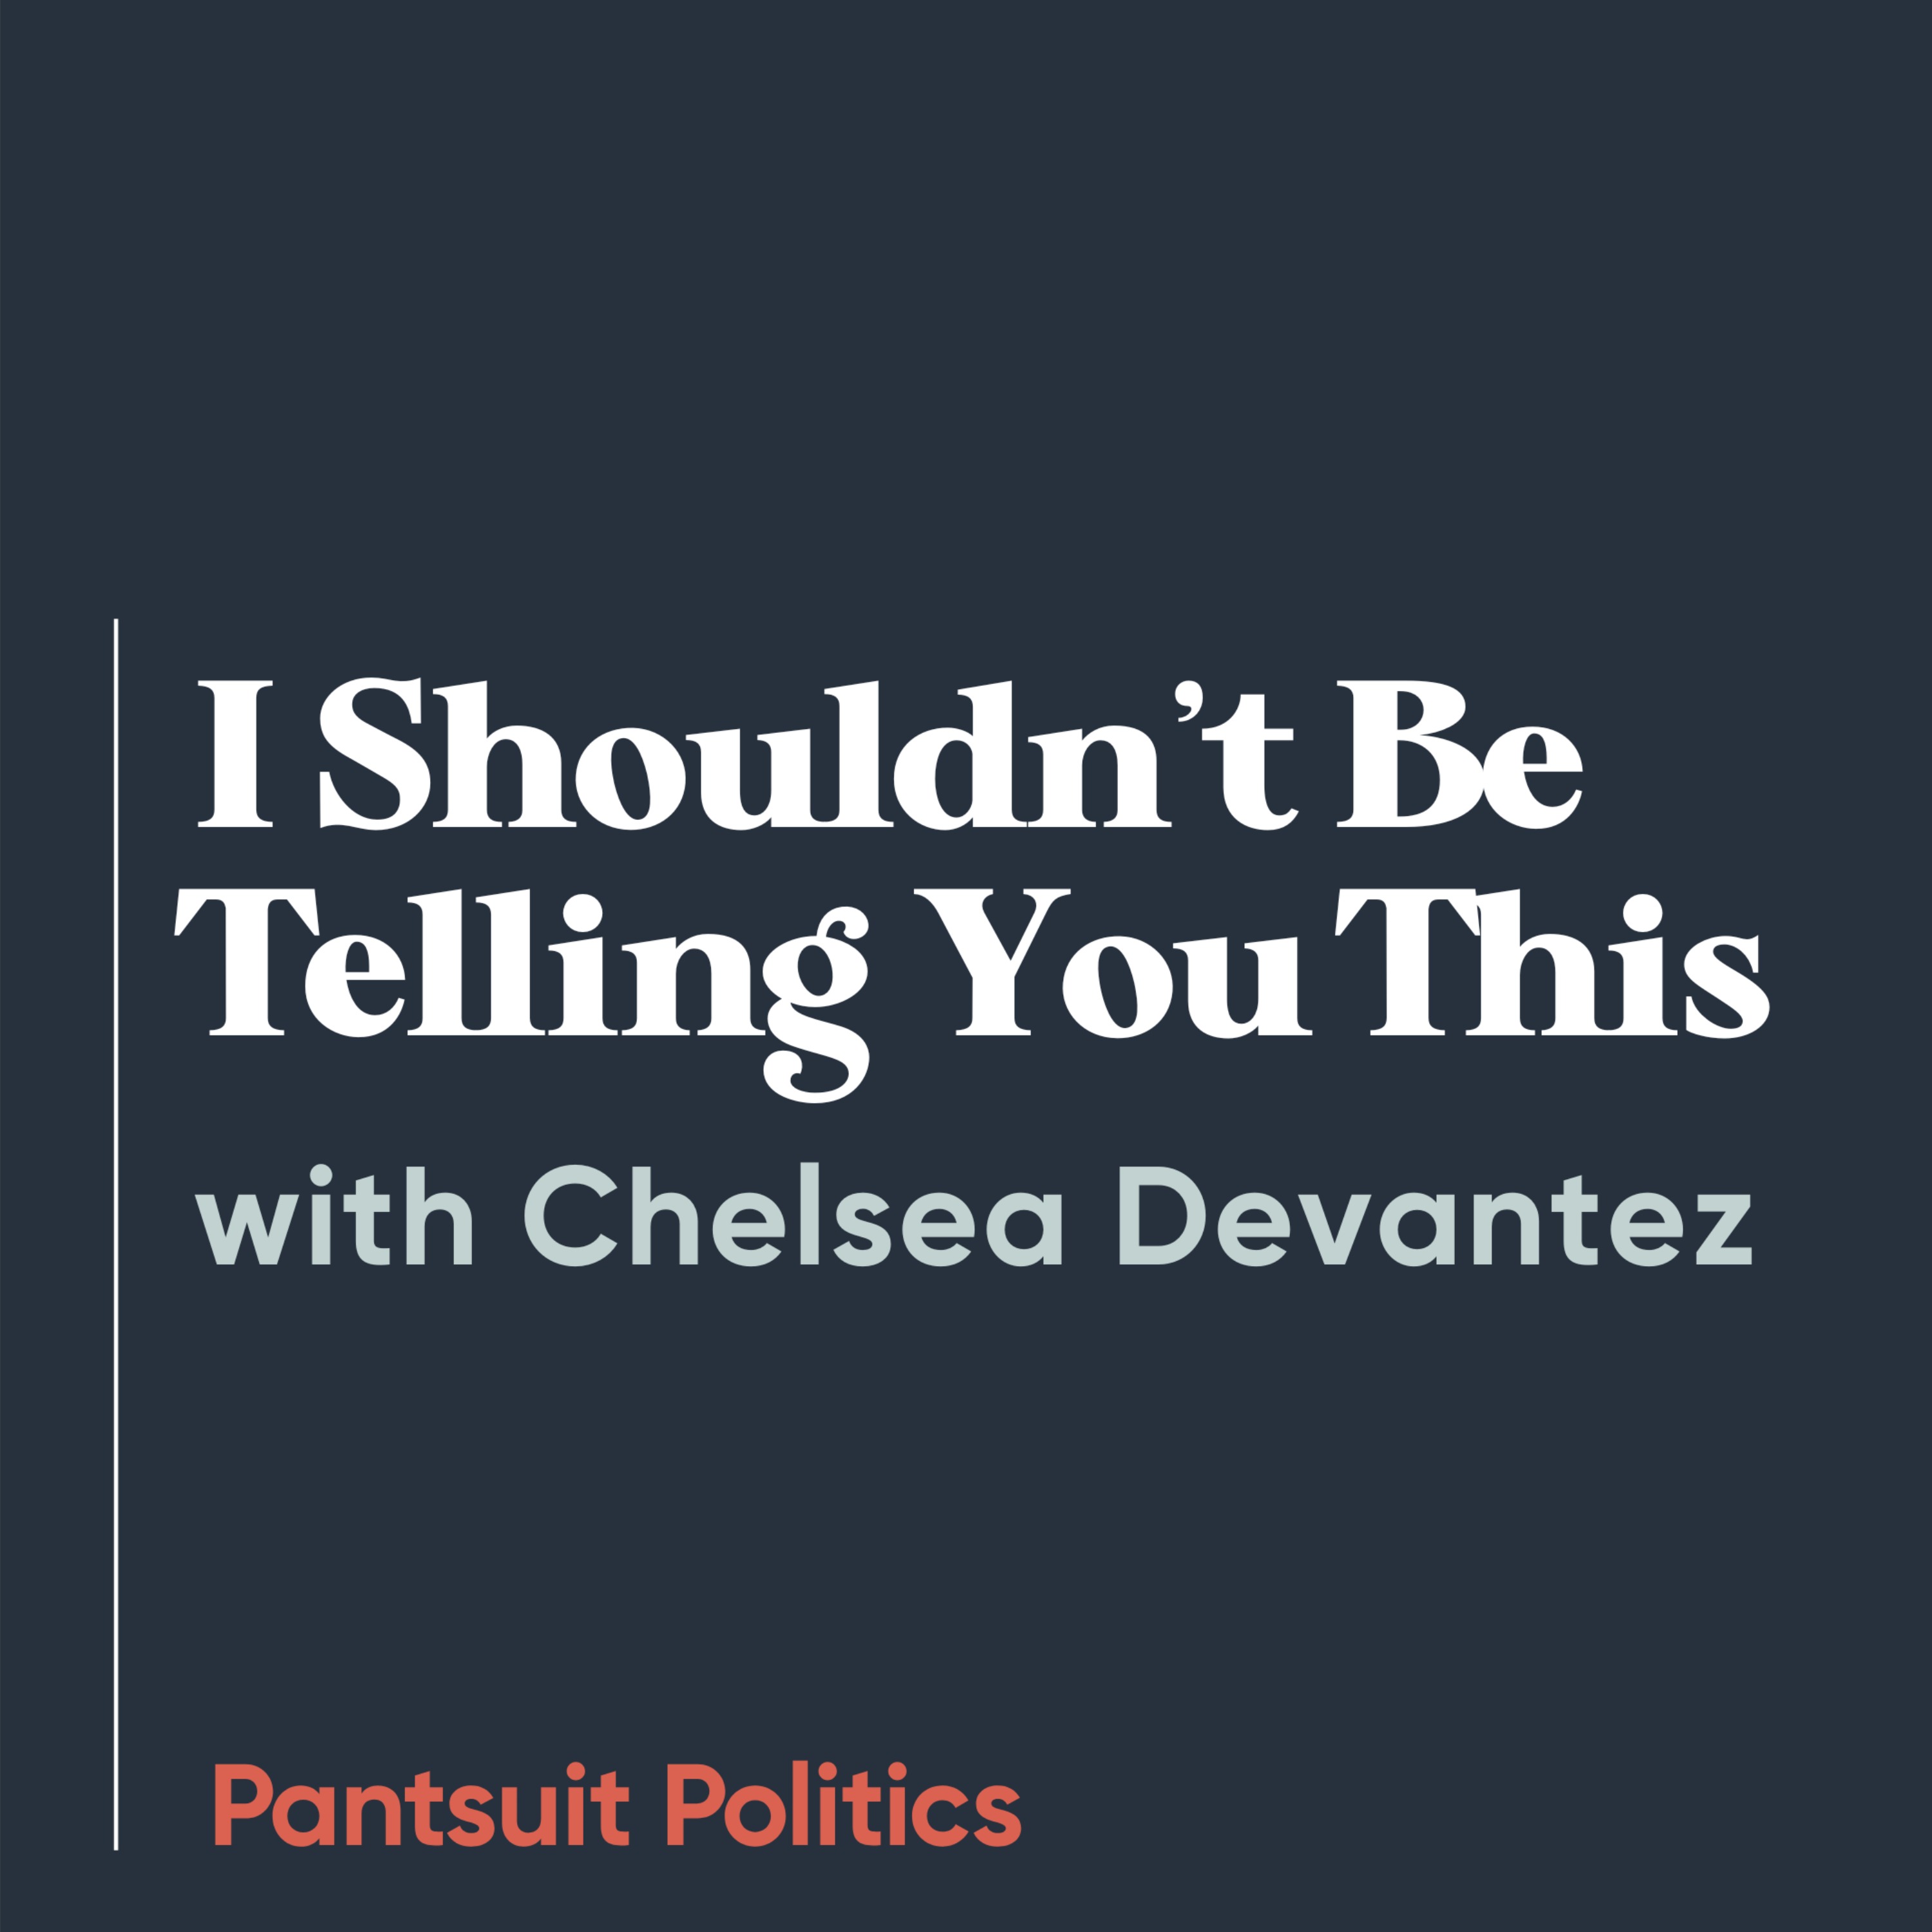 I Shouldn’t Be Telling You This with Chelsea Devantez